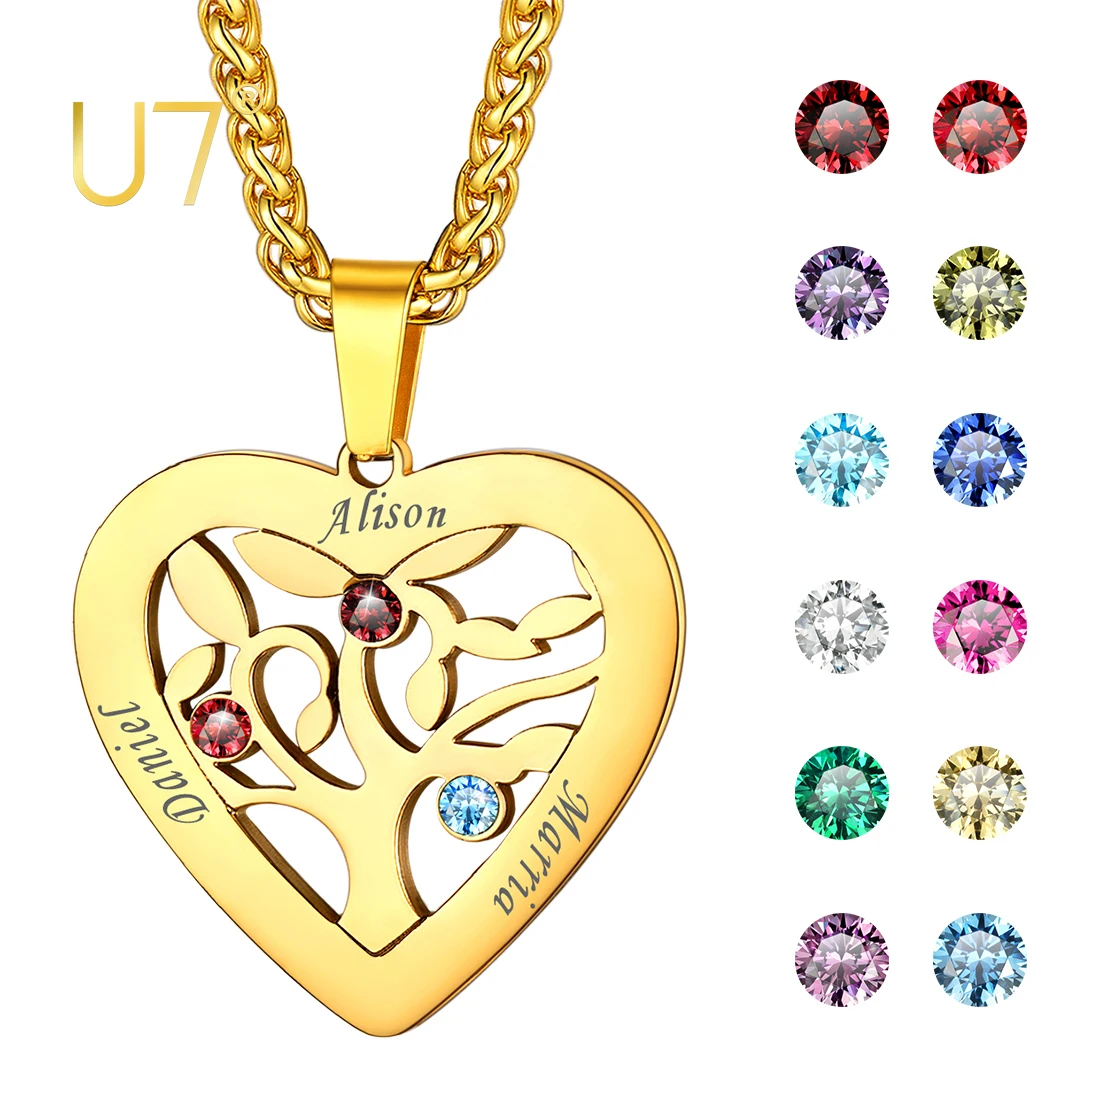 U7 Heart Pendant Necklace Personalized Engraved Stainless Steel Jewelry Friend Family Names Birthstone Gift for Women Girls e0bf 1 2pcs couple necklace bracelet relationship matching taichi fish bracelet for women teen best friend family jewelry